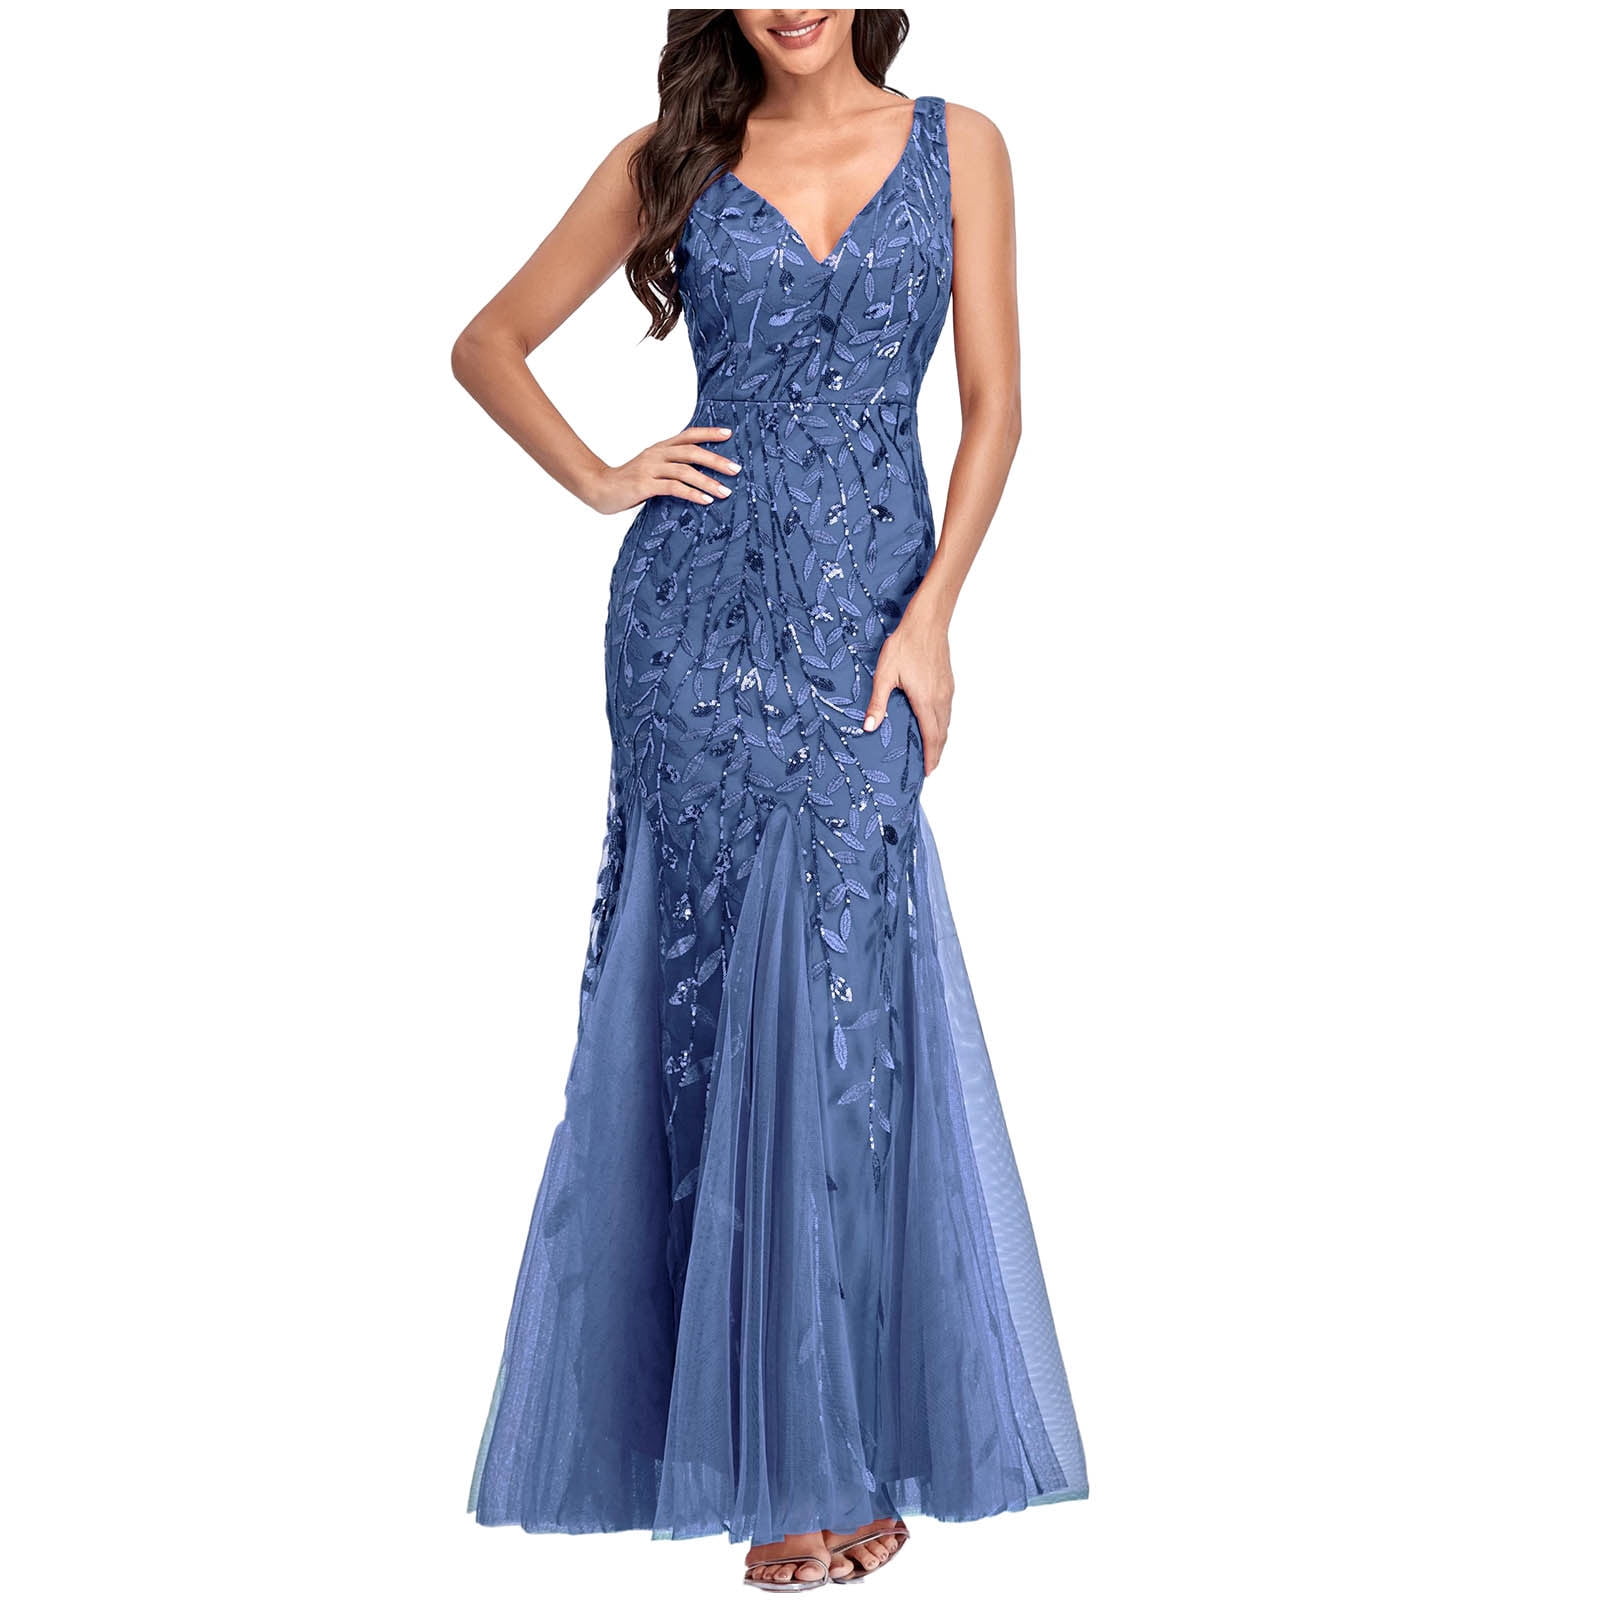 Fesfesfes Evening Gowns for Women Slim Fit Formal Sequins Long Dress ...